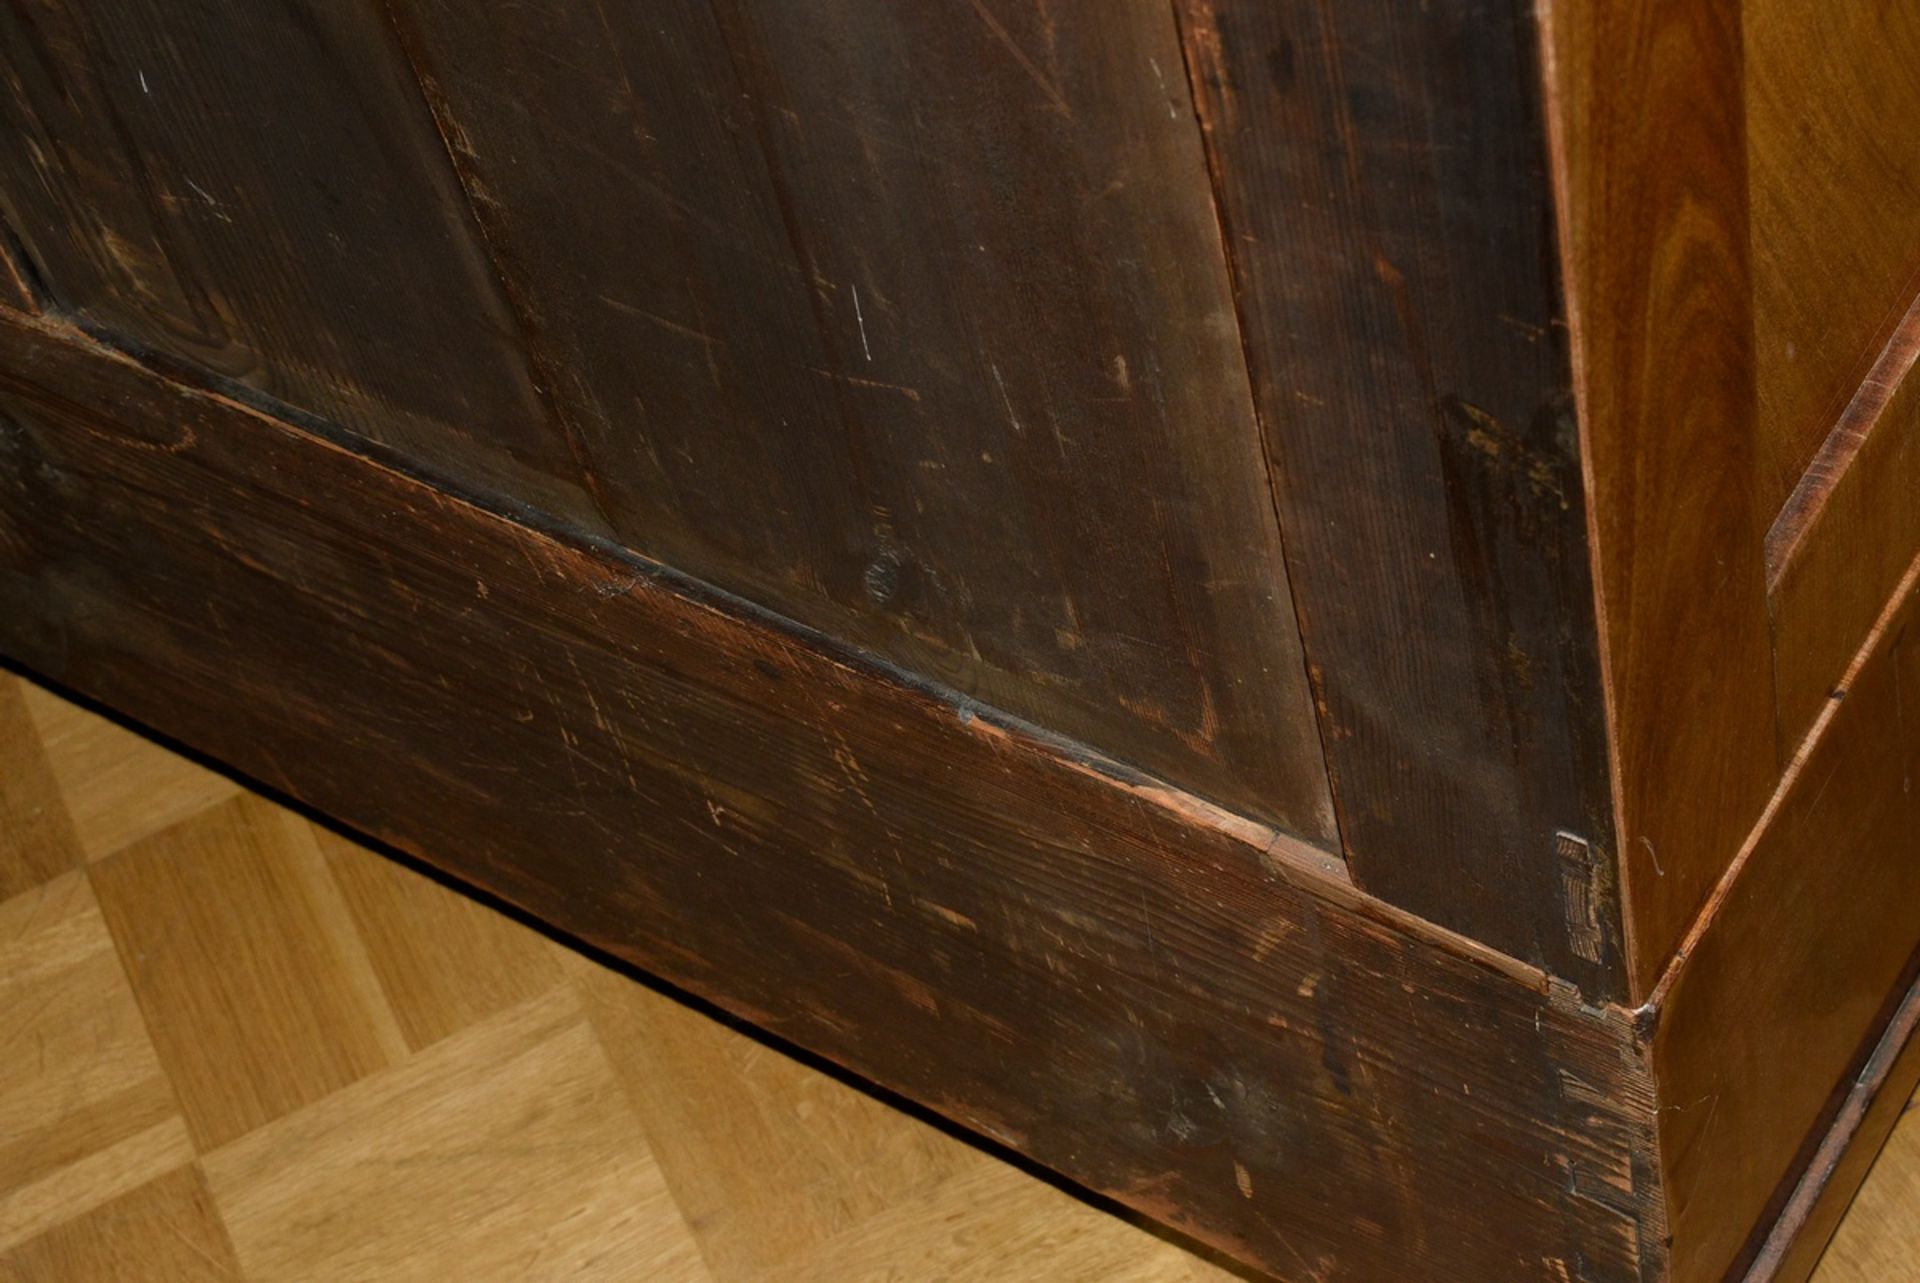 Biedermeier bookcase with gothic arches in the cornice and diamond bracing on the glazed doors betw - Image 16 of 16